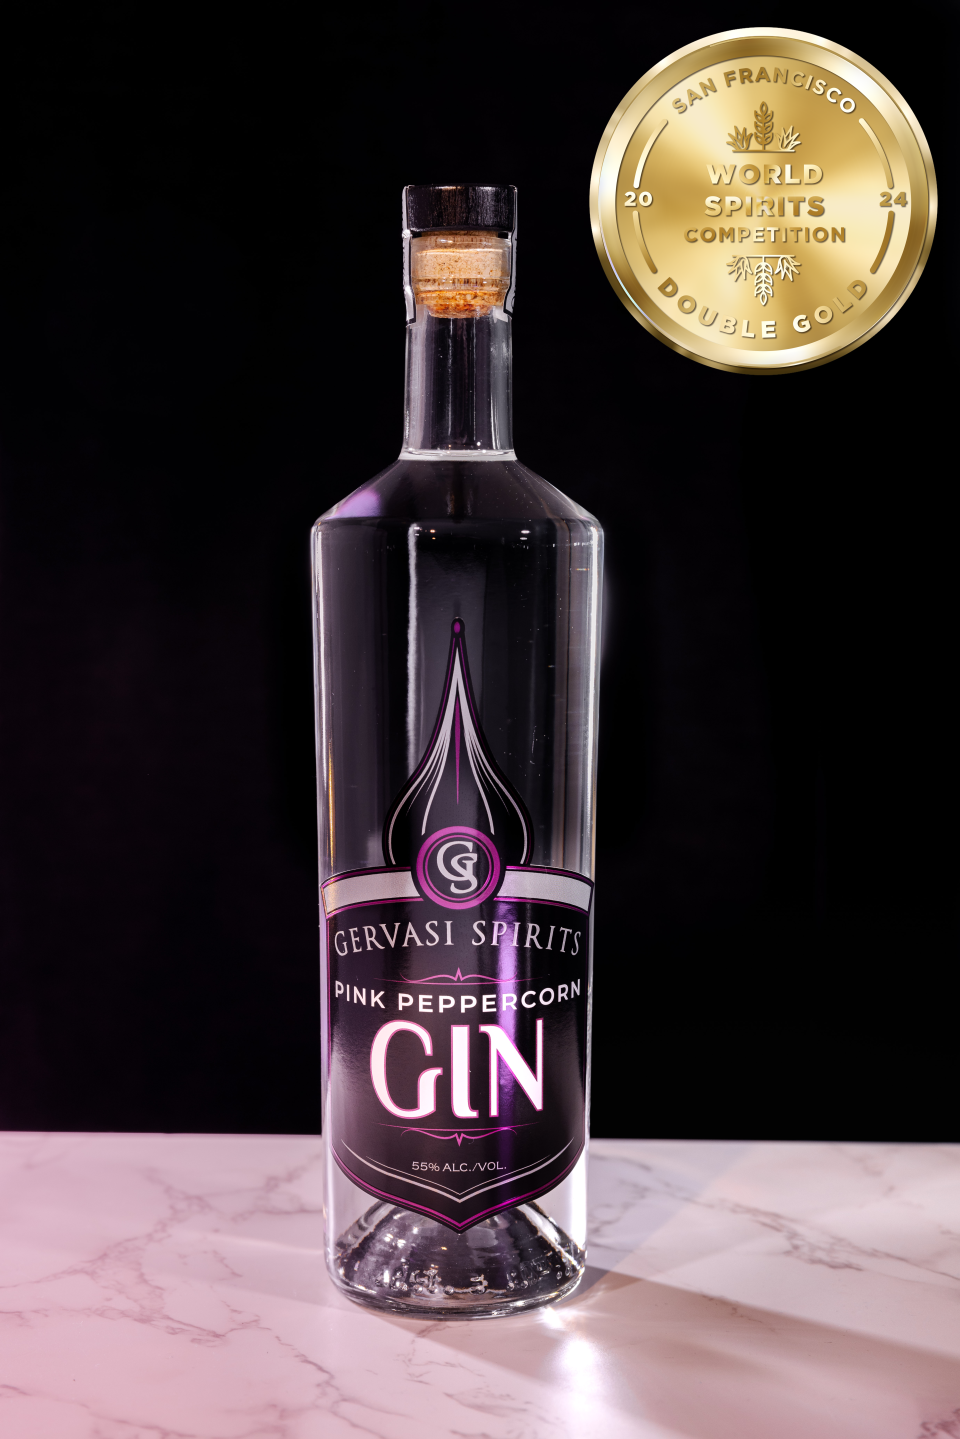 Gervasi Spirits awarded a Double Gold Medal for its Pink Peppercorn Gin.